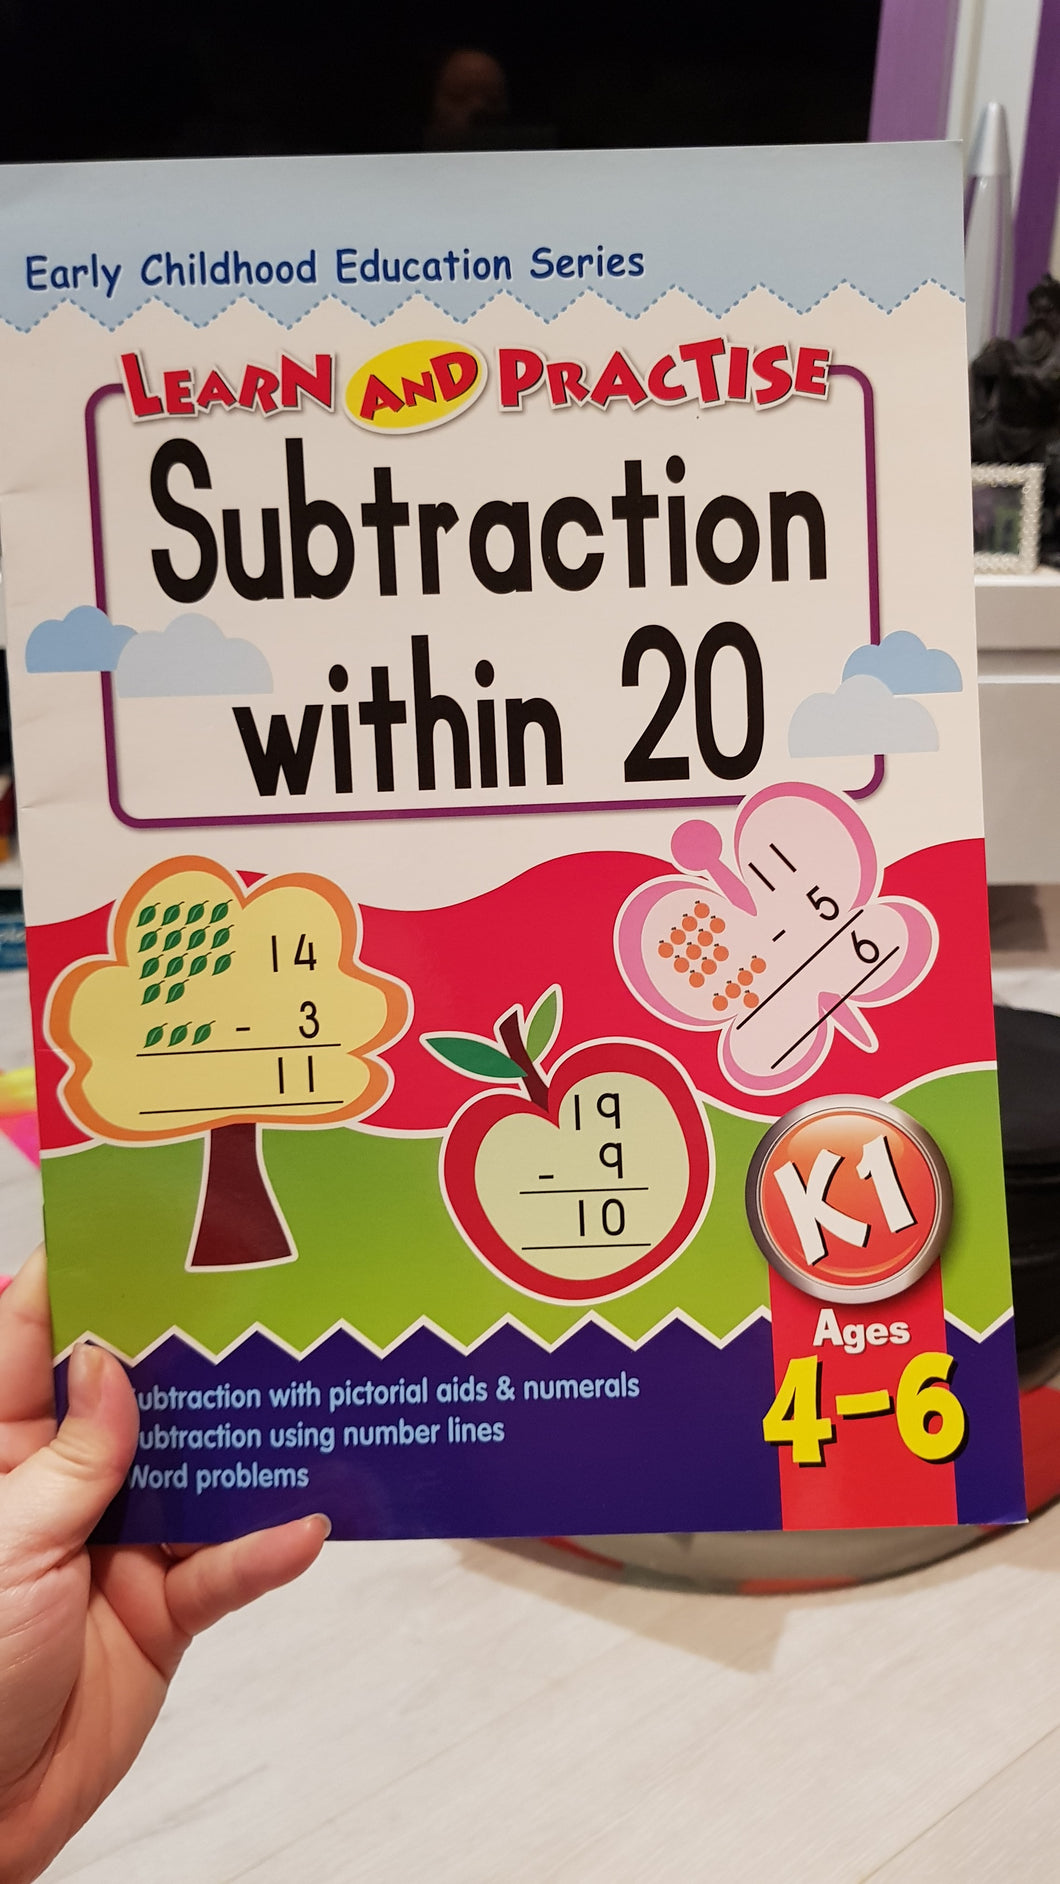 LEARN & PRACTISE SUBTRACTION WITHIN 20 AGE 4-6